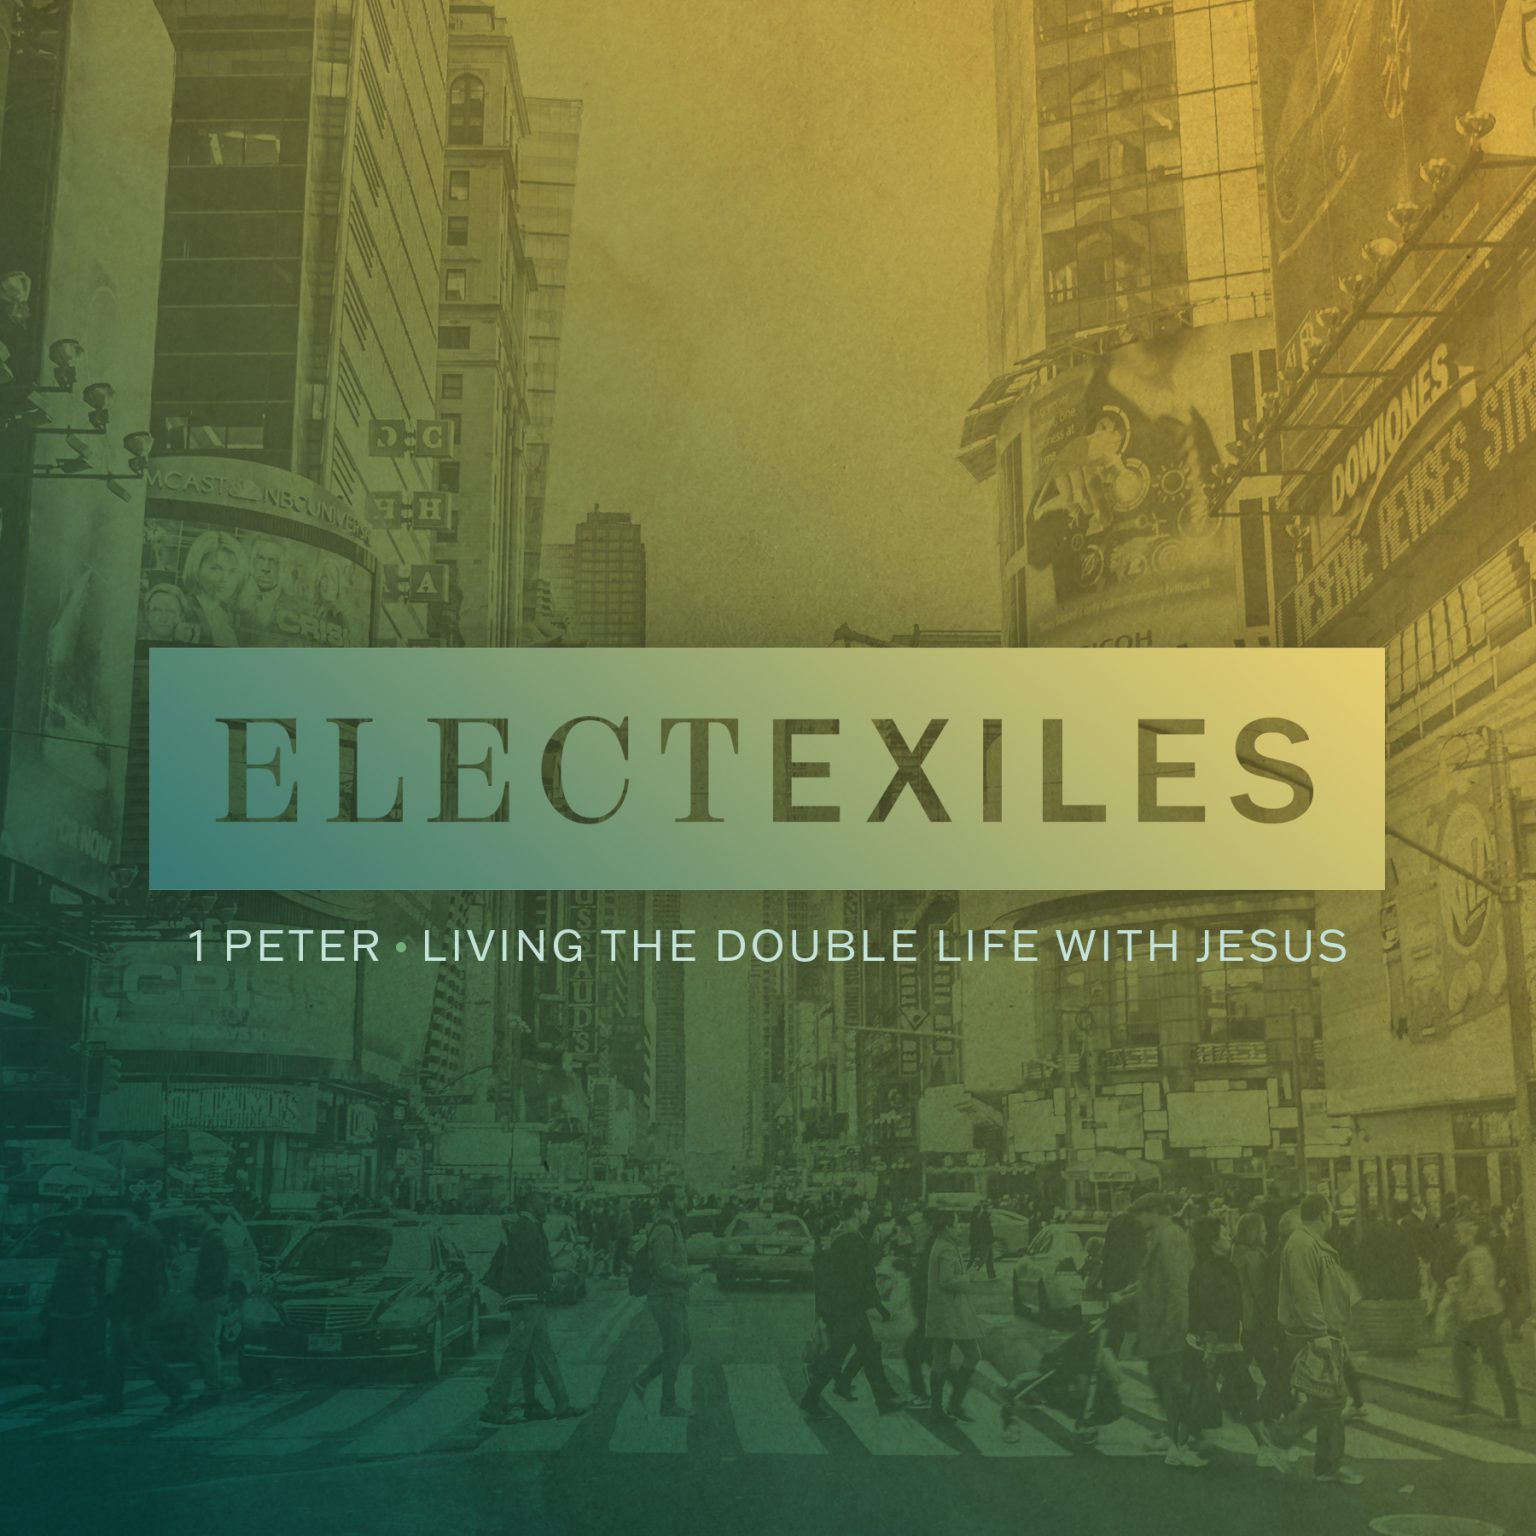 Elect Exiles: Living the Double Life with Jesus